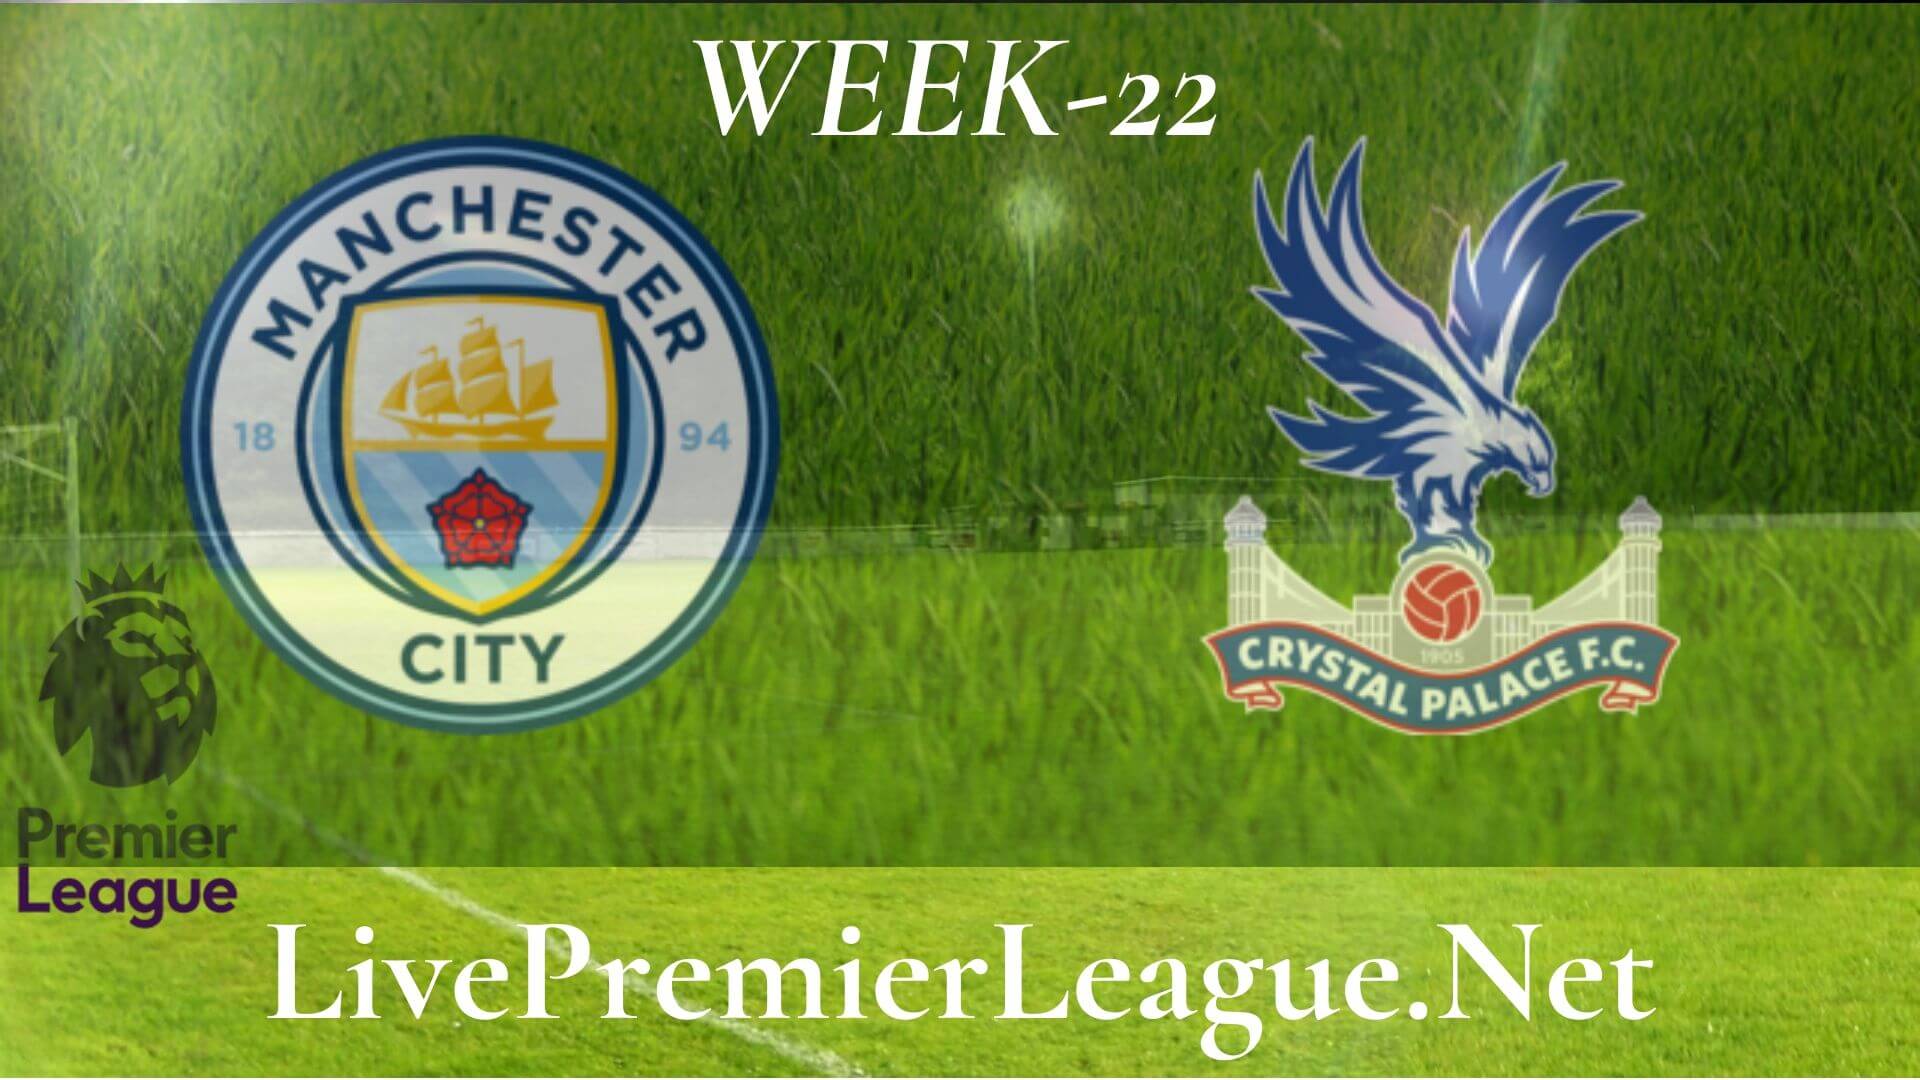 Manchester City vs Crystal Palace live stream | EPL Week 22